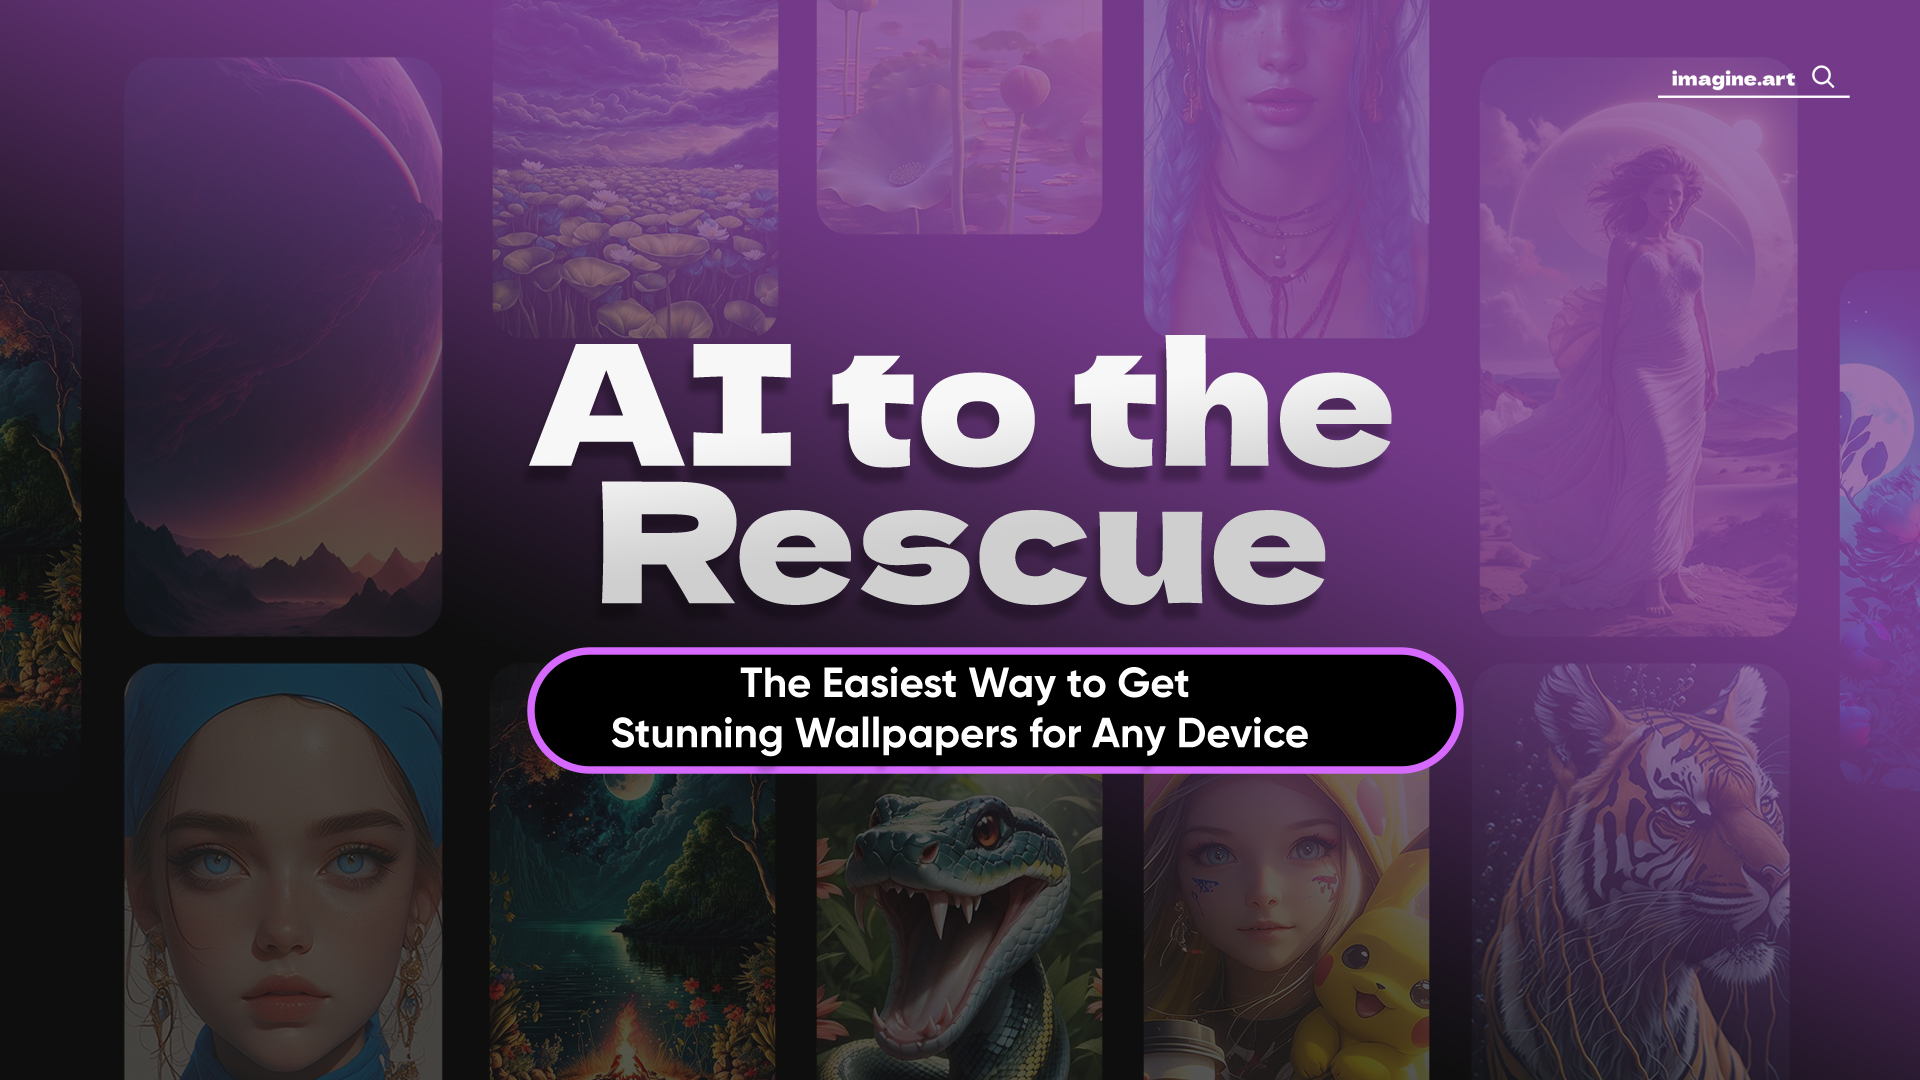 AI to the Rescue: The Easiest Way to Get Stunning Wallpapers for Any Device